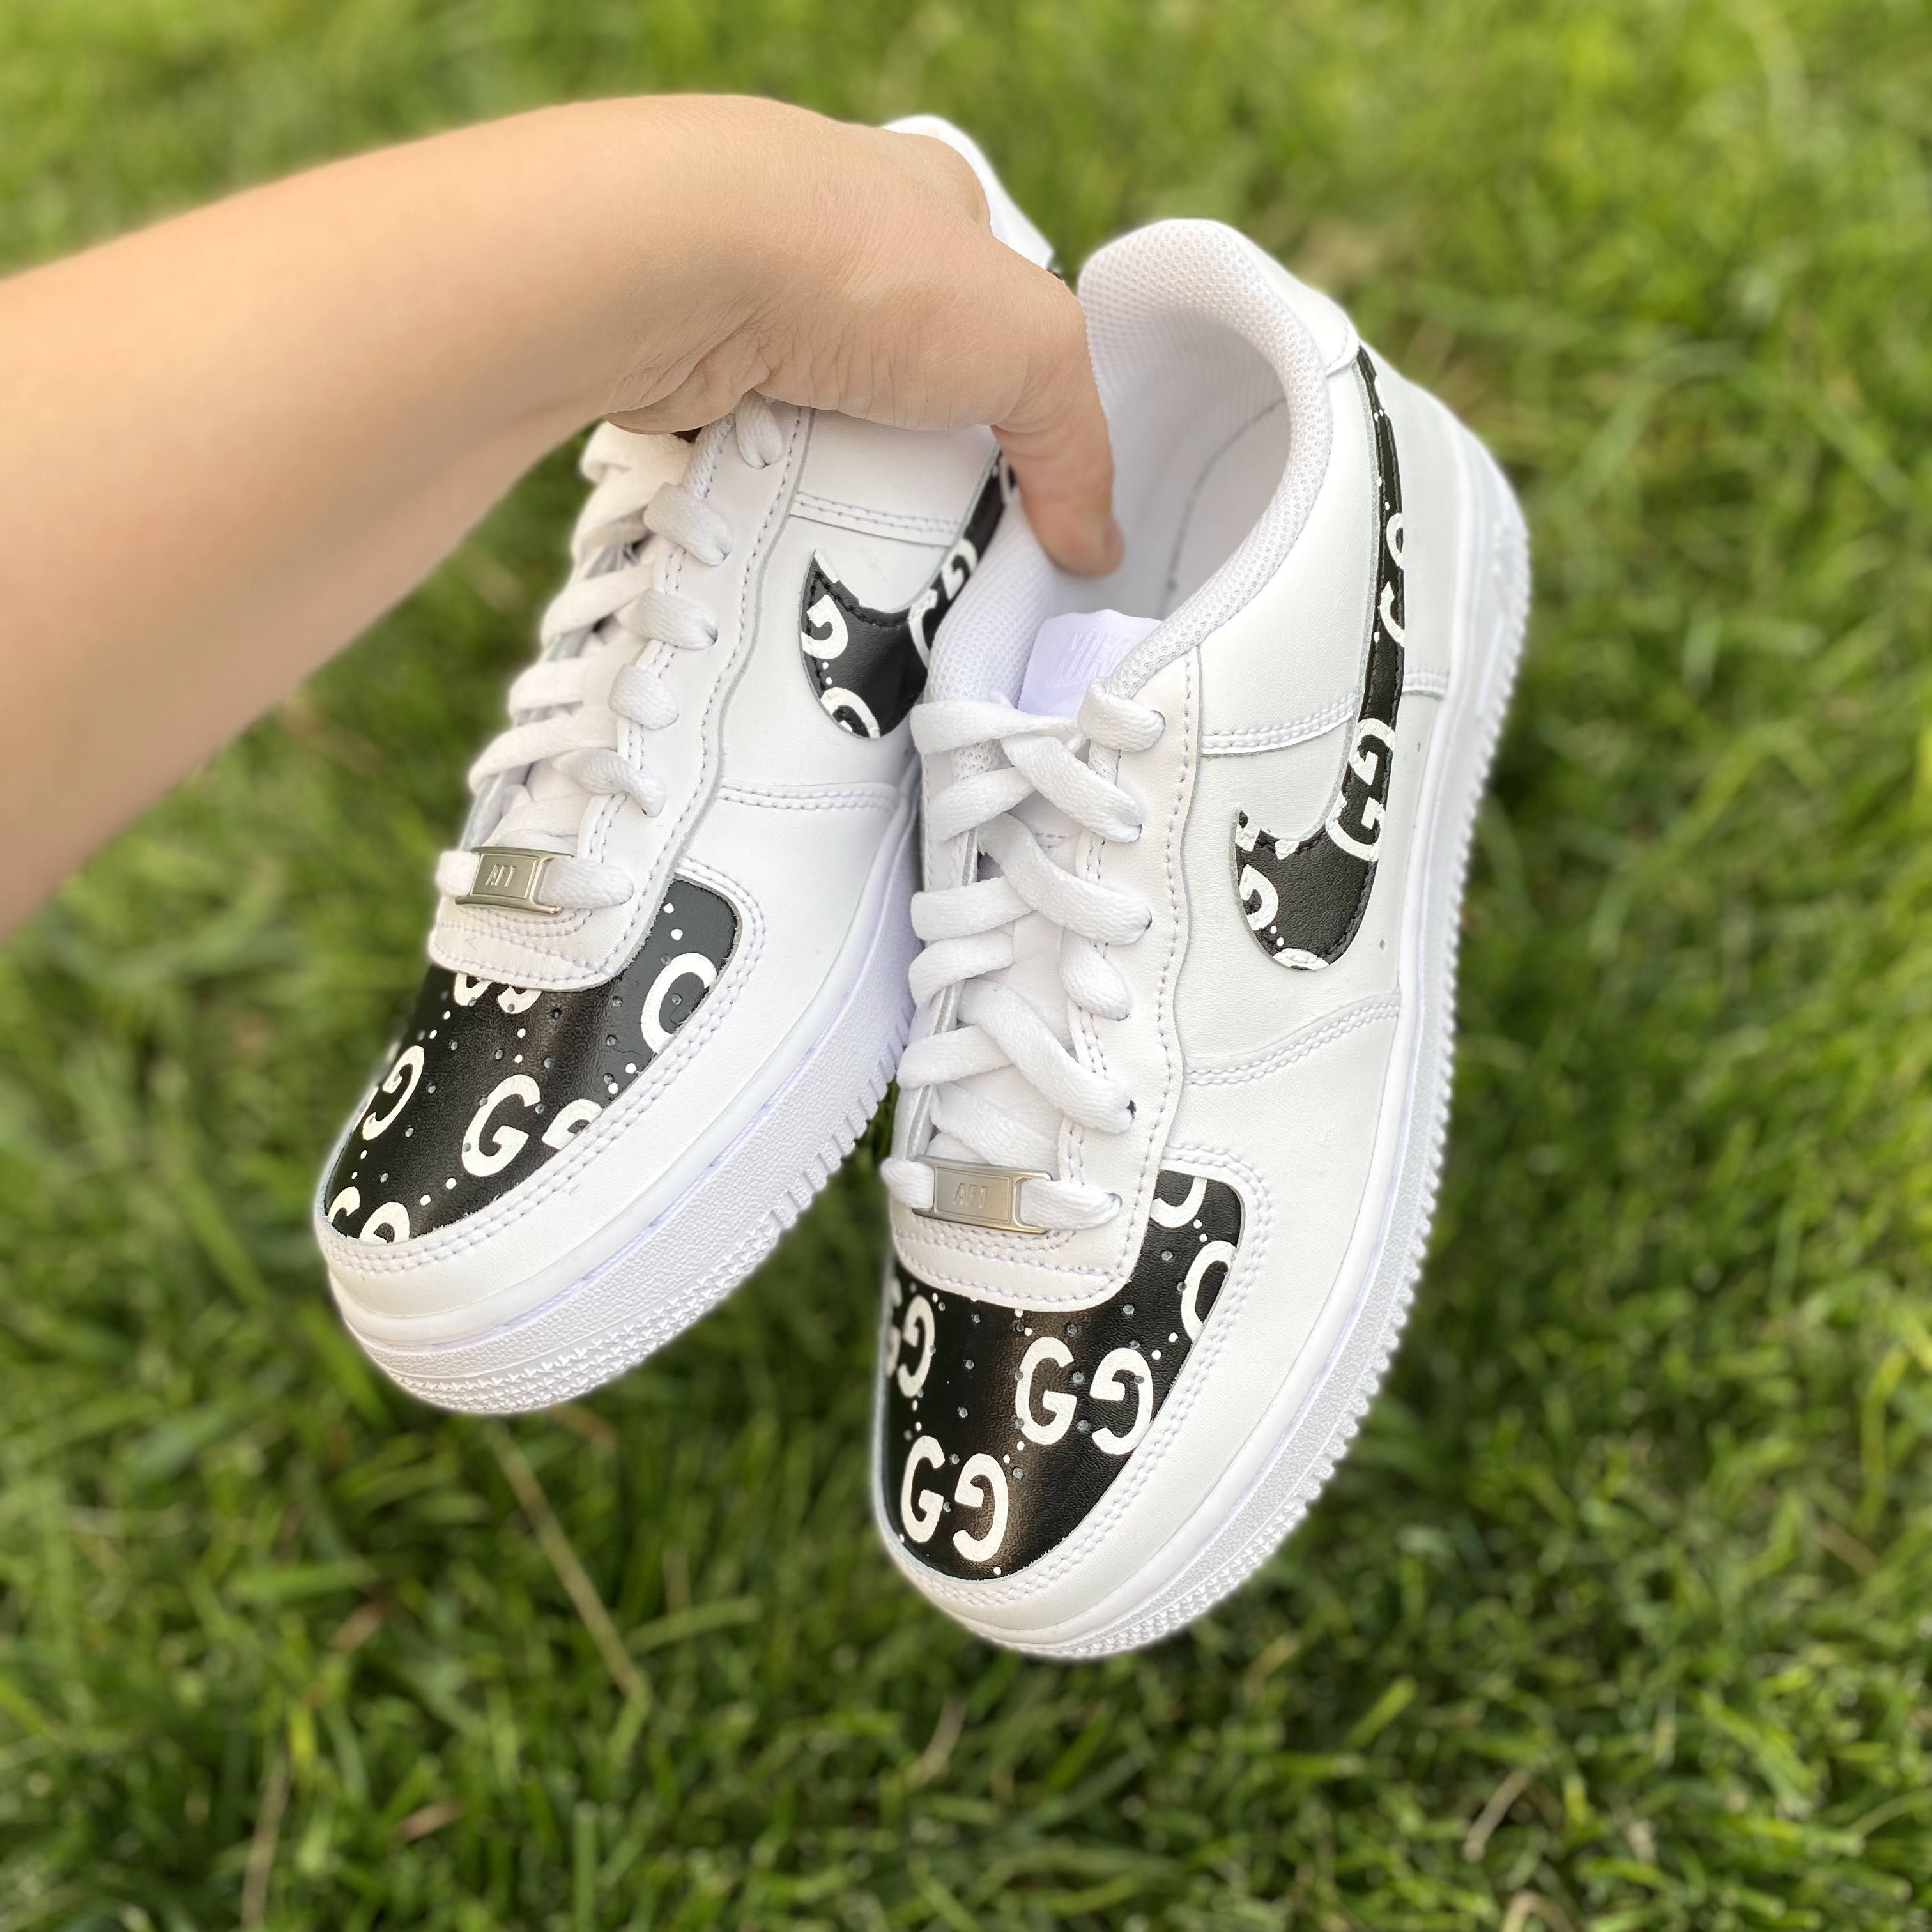 Black and White GG - Gucci Inspired - Custom Air Force 1 - Hand